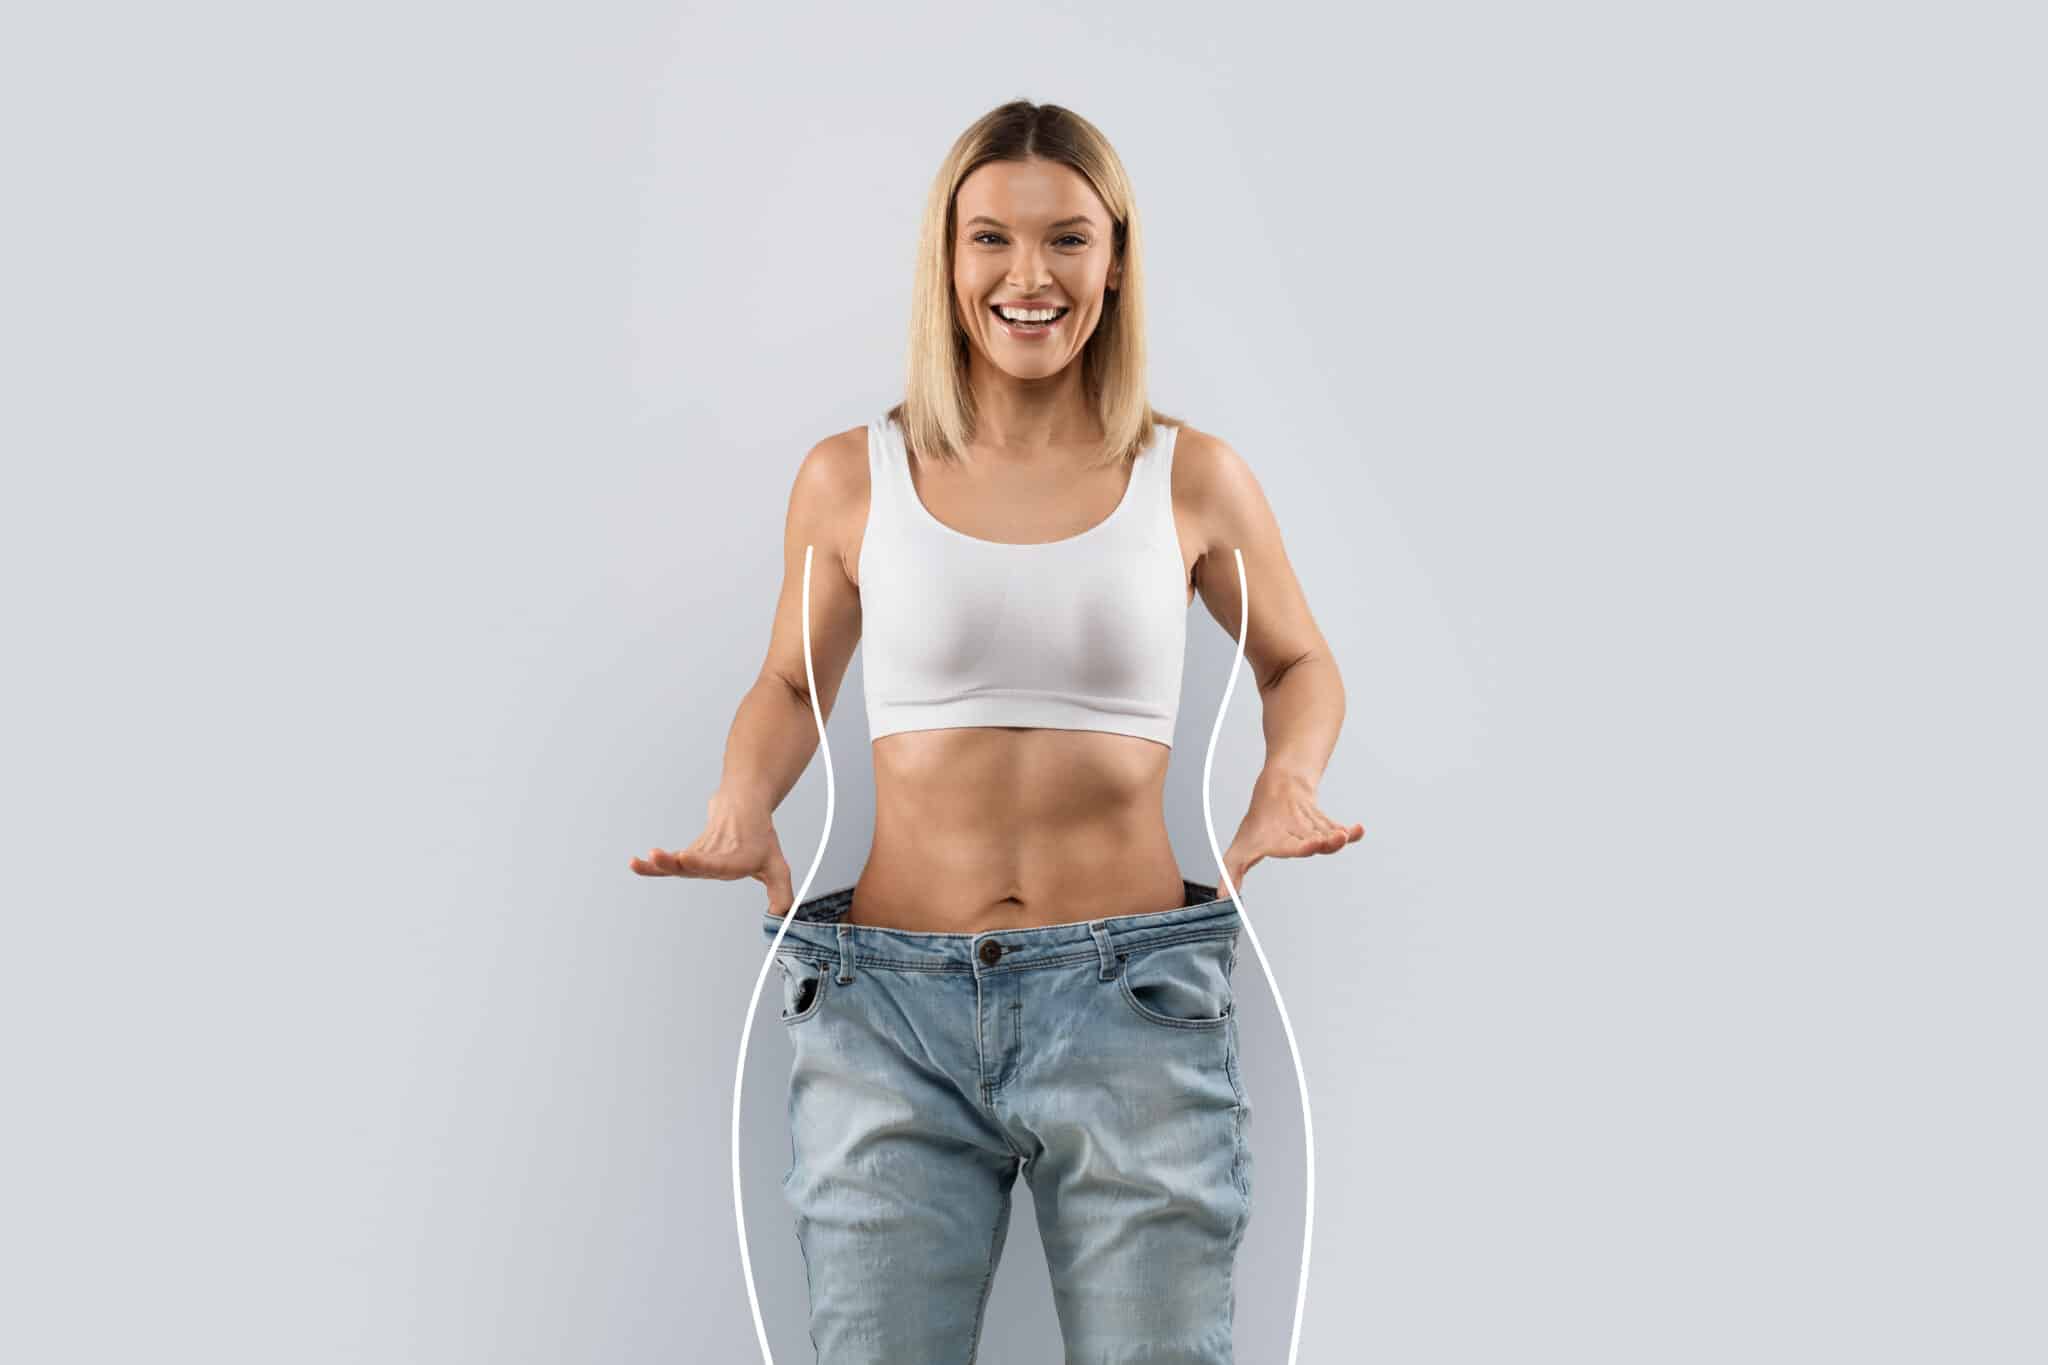 emagrecimento mulher emagrecendo mitos sobre o emagrecimento Weight loss, slimming, diets, detox, sport, fitness, healthy lifestyle concept. Emotional happy attractive slender middle aged blonde woman in big jeans over grey background, collage, copy space